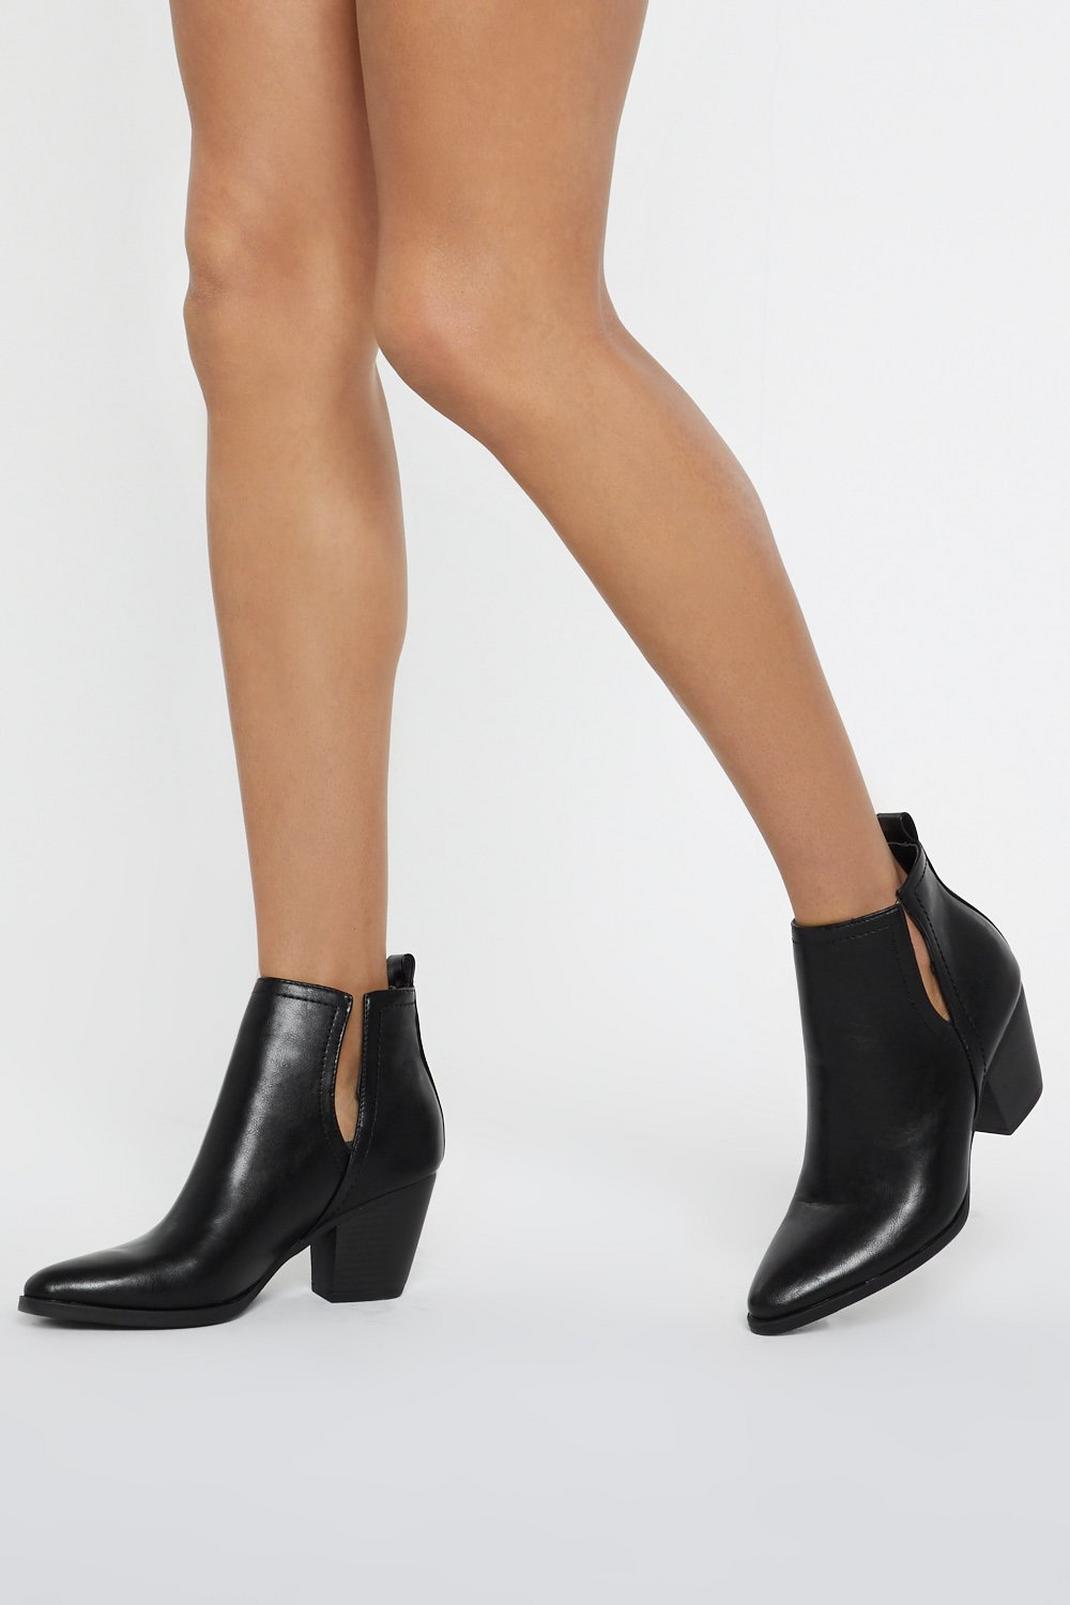 It's Notch You Cut-Out Faux Leather Boots | Nasty Gal